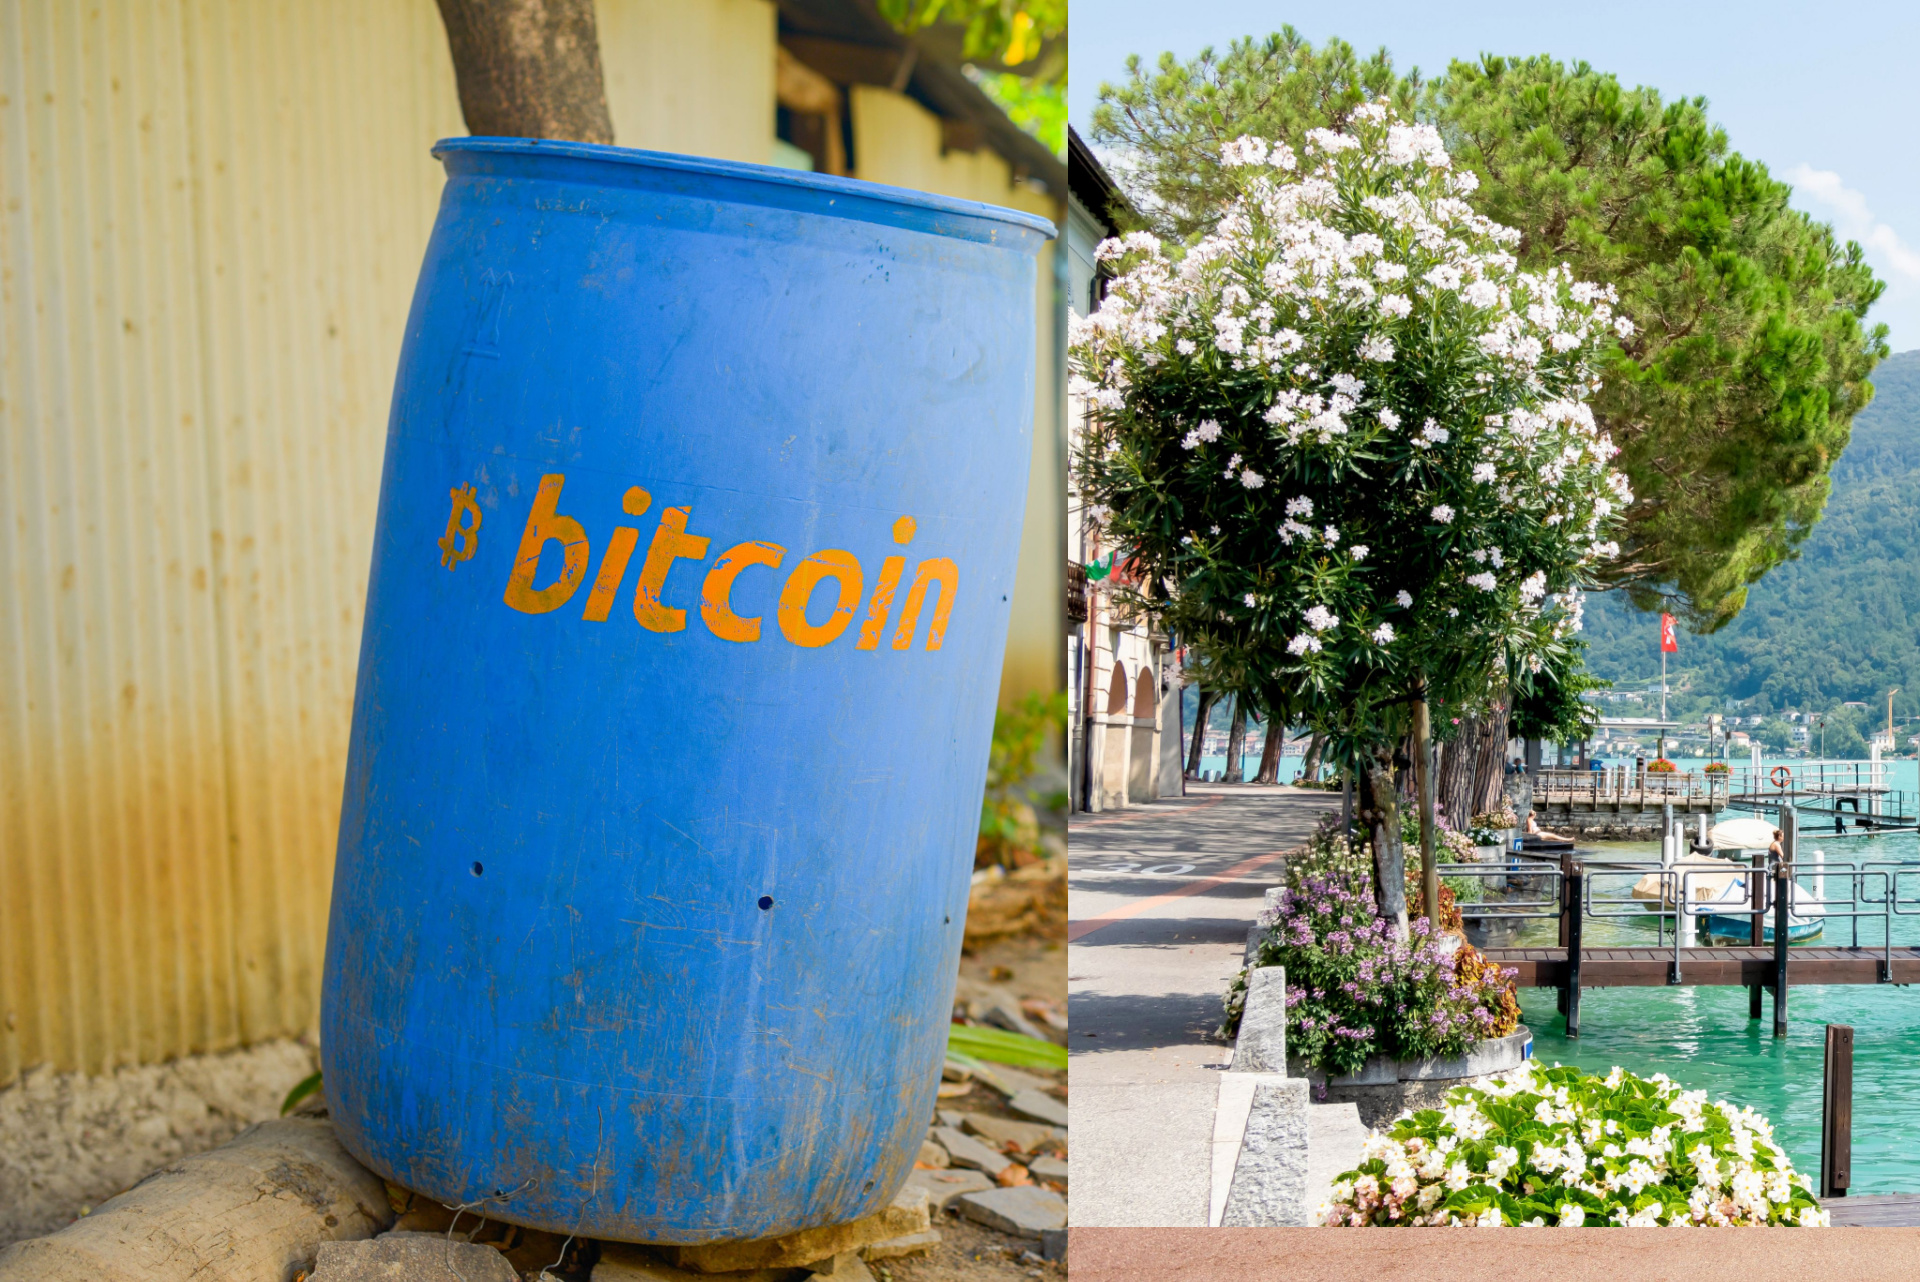 El Salvador and the City of Lugano Sign Agreement to Boost Bitcoin Adoption